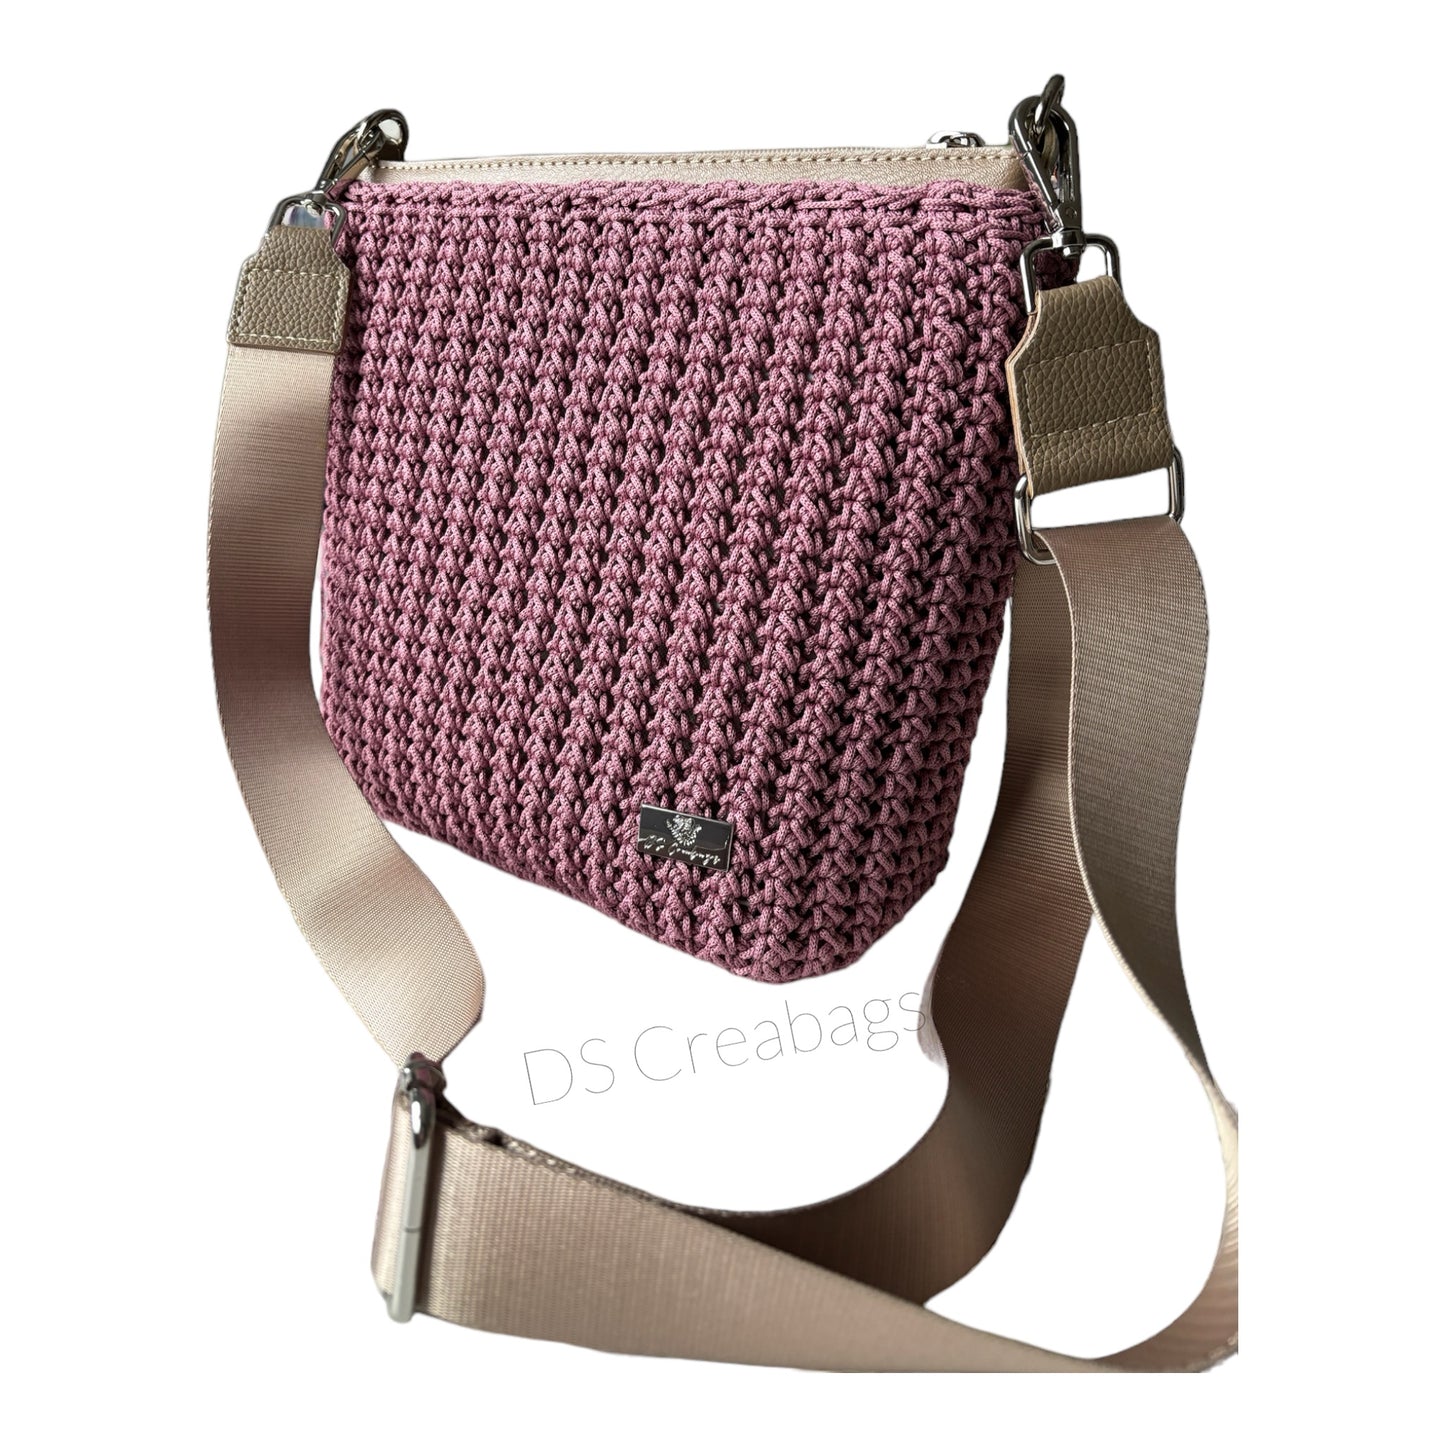 AMELIA crossbody perfect size for day-to-day use